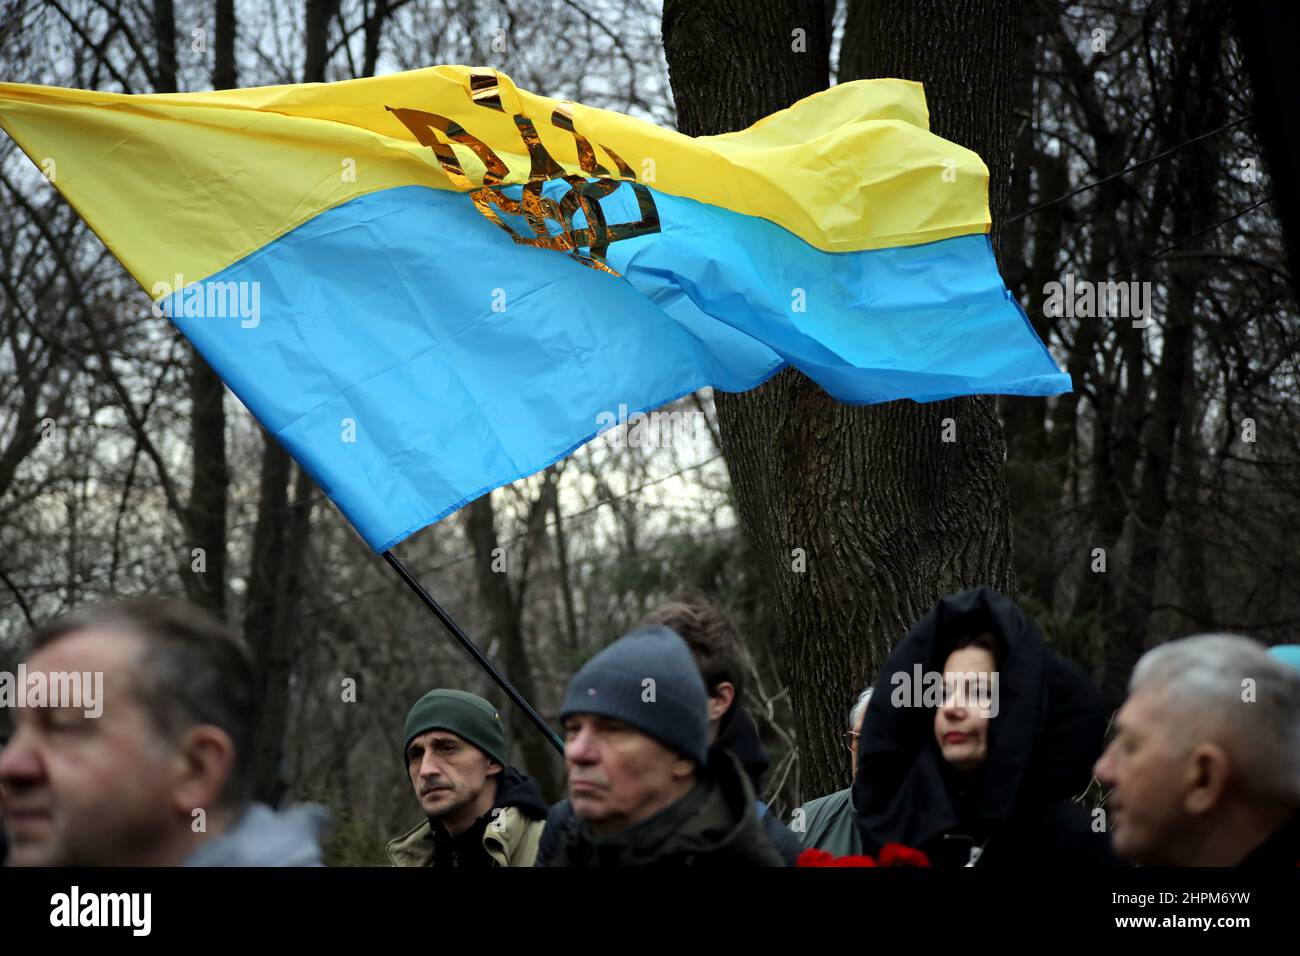 KYIV, UKRAINE - FEBRUARY 19, 2022 - A Ukrainian flag with the tryzub (trident) flies above the people attending the commemorative event for the Debalt Stock Photo